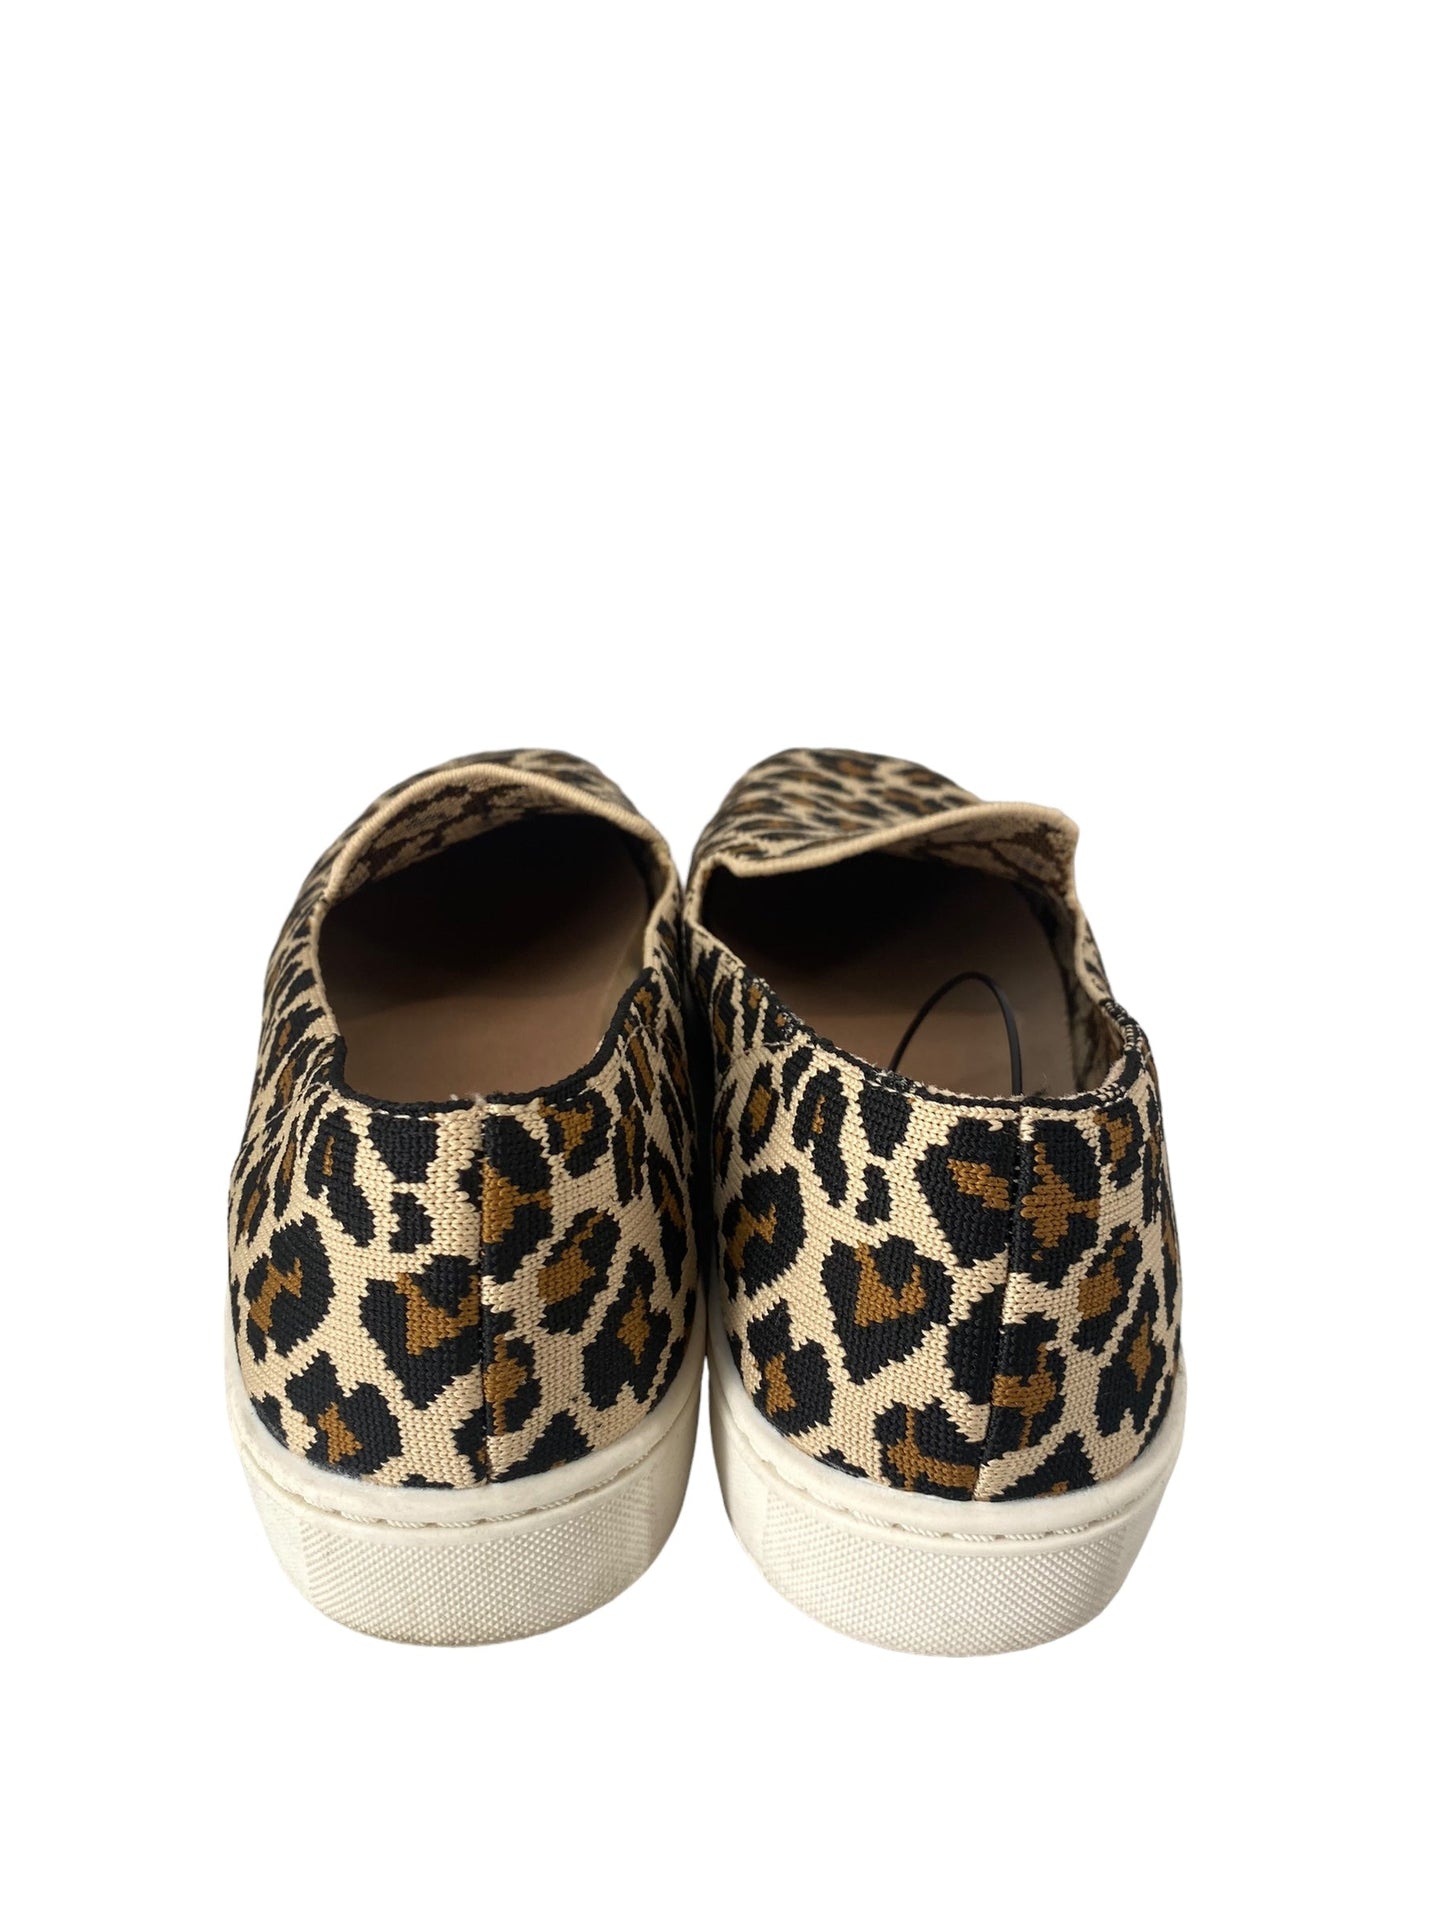 Animal Print Shoes Sneakers Time And Tru, Size 11